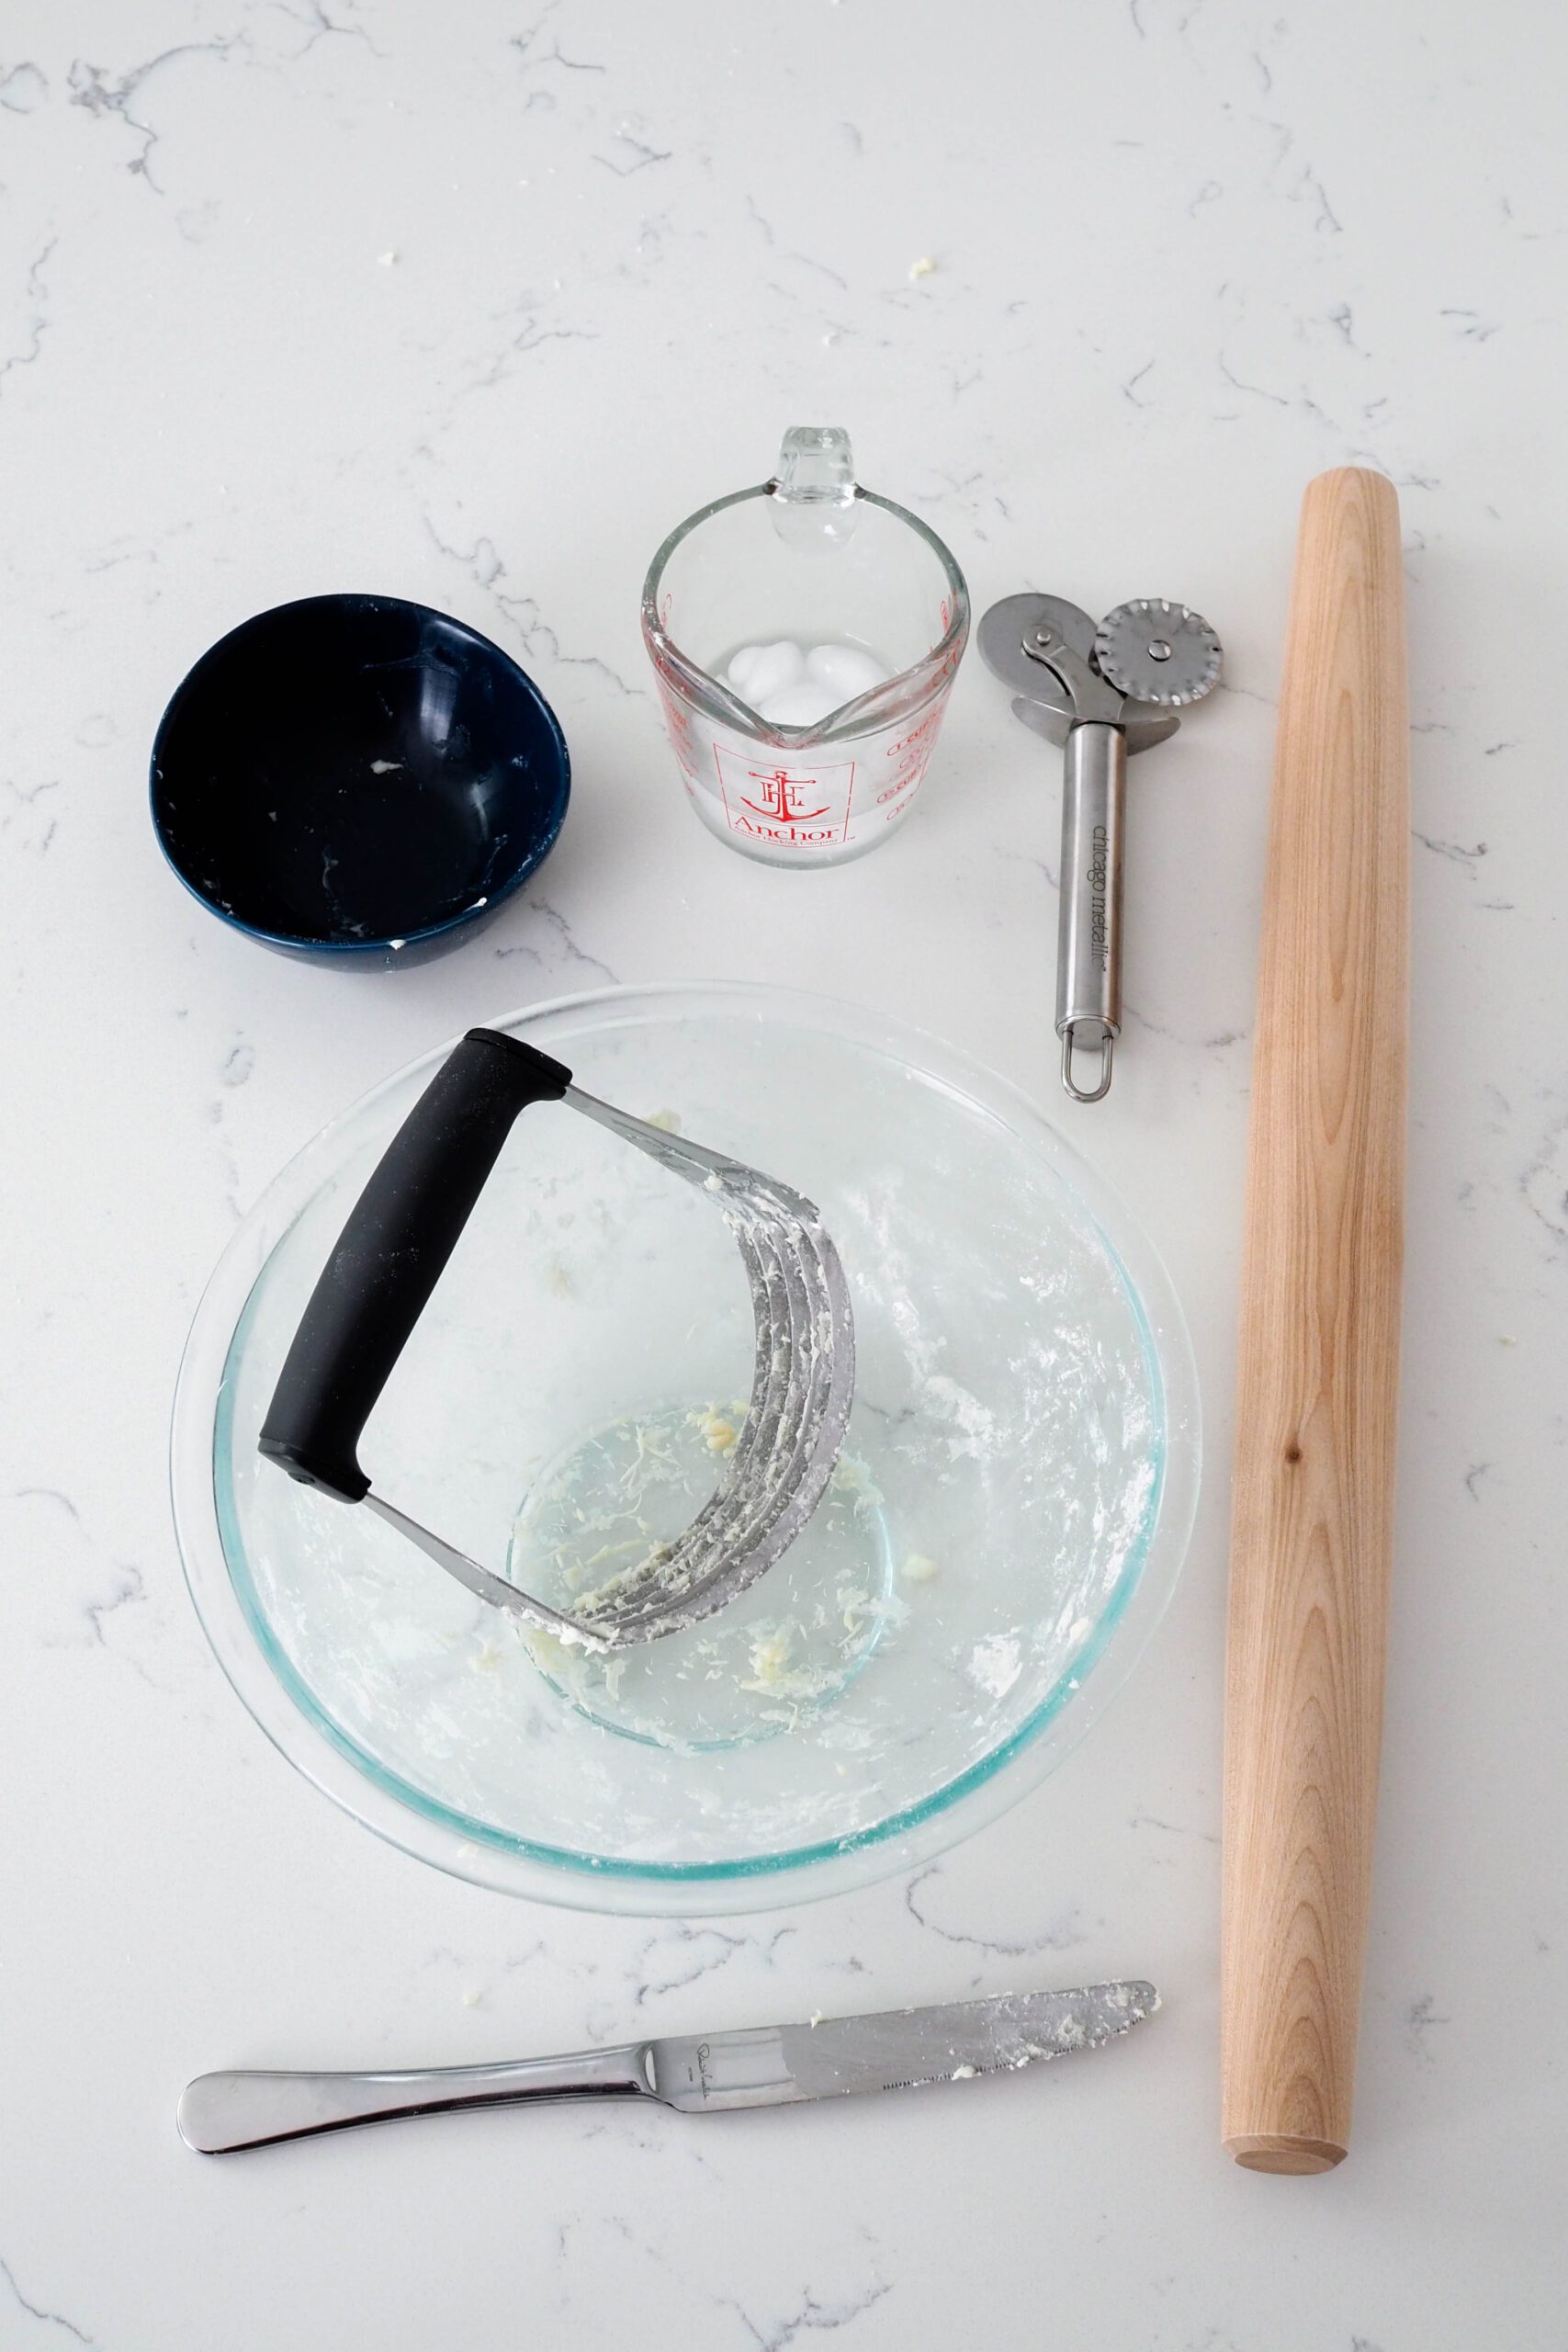 A large bowl, a rolling pin, and some smaller dishes on a white quartz counter.